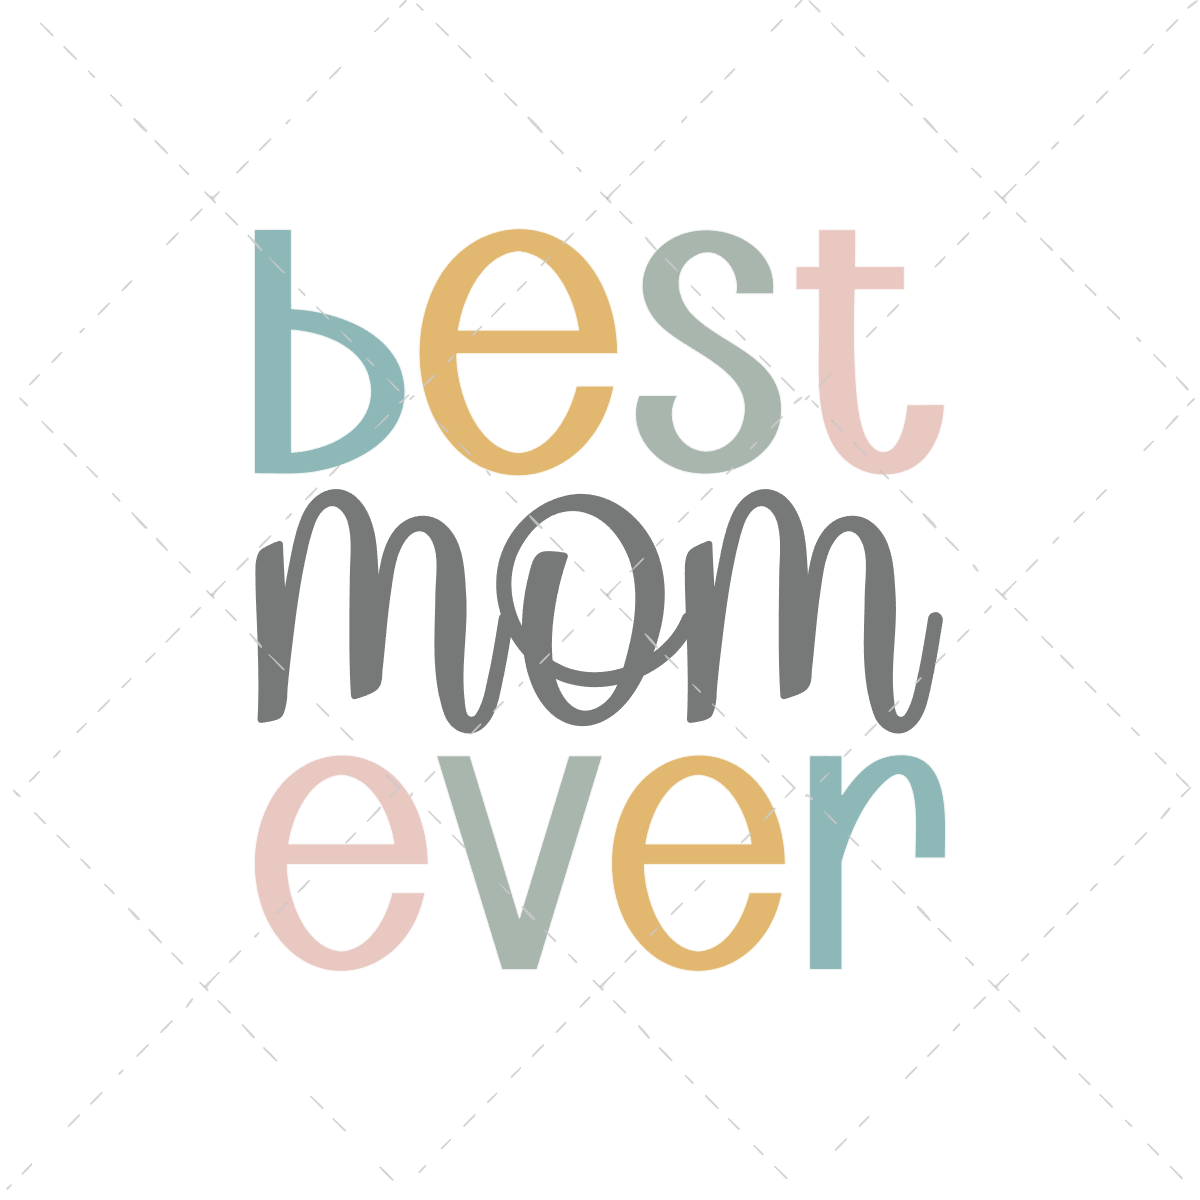 Download Best Mom Ever The Girl Creative